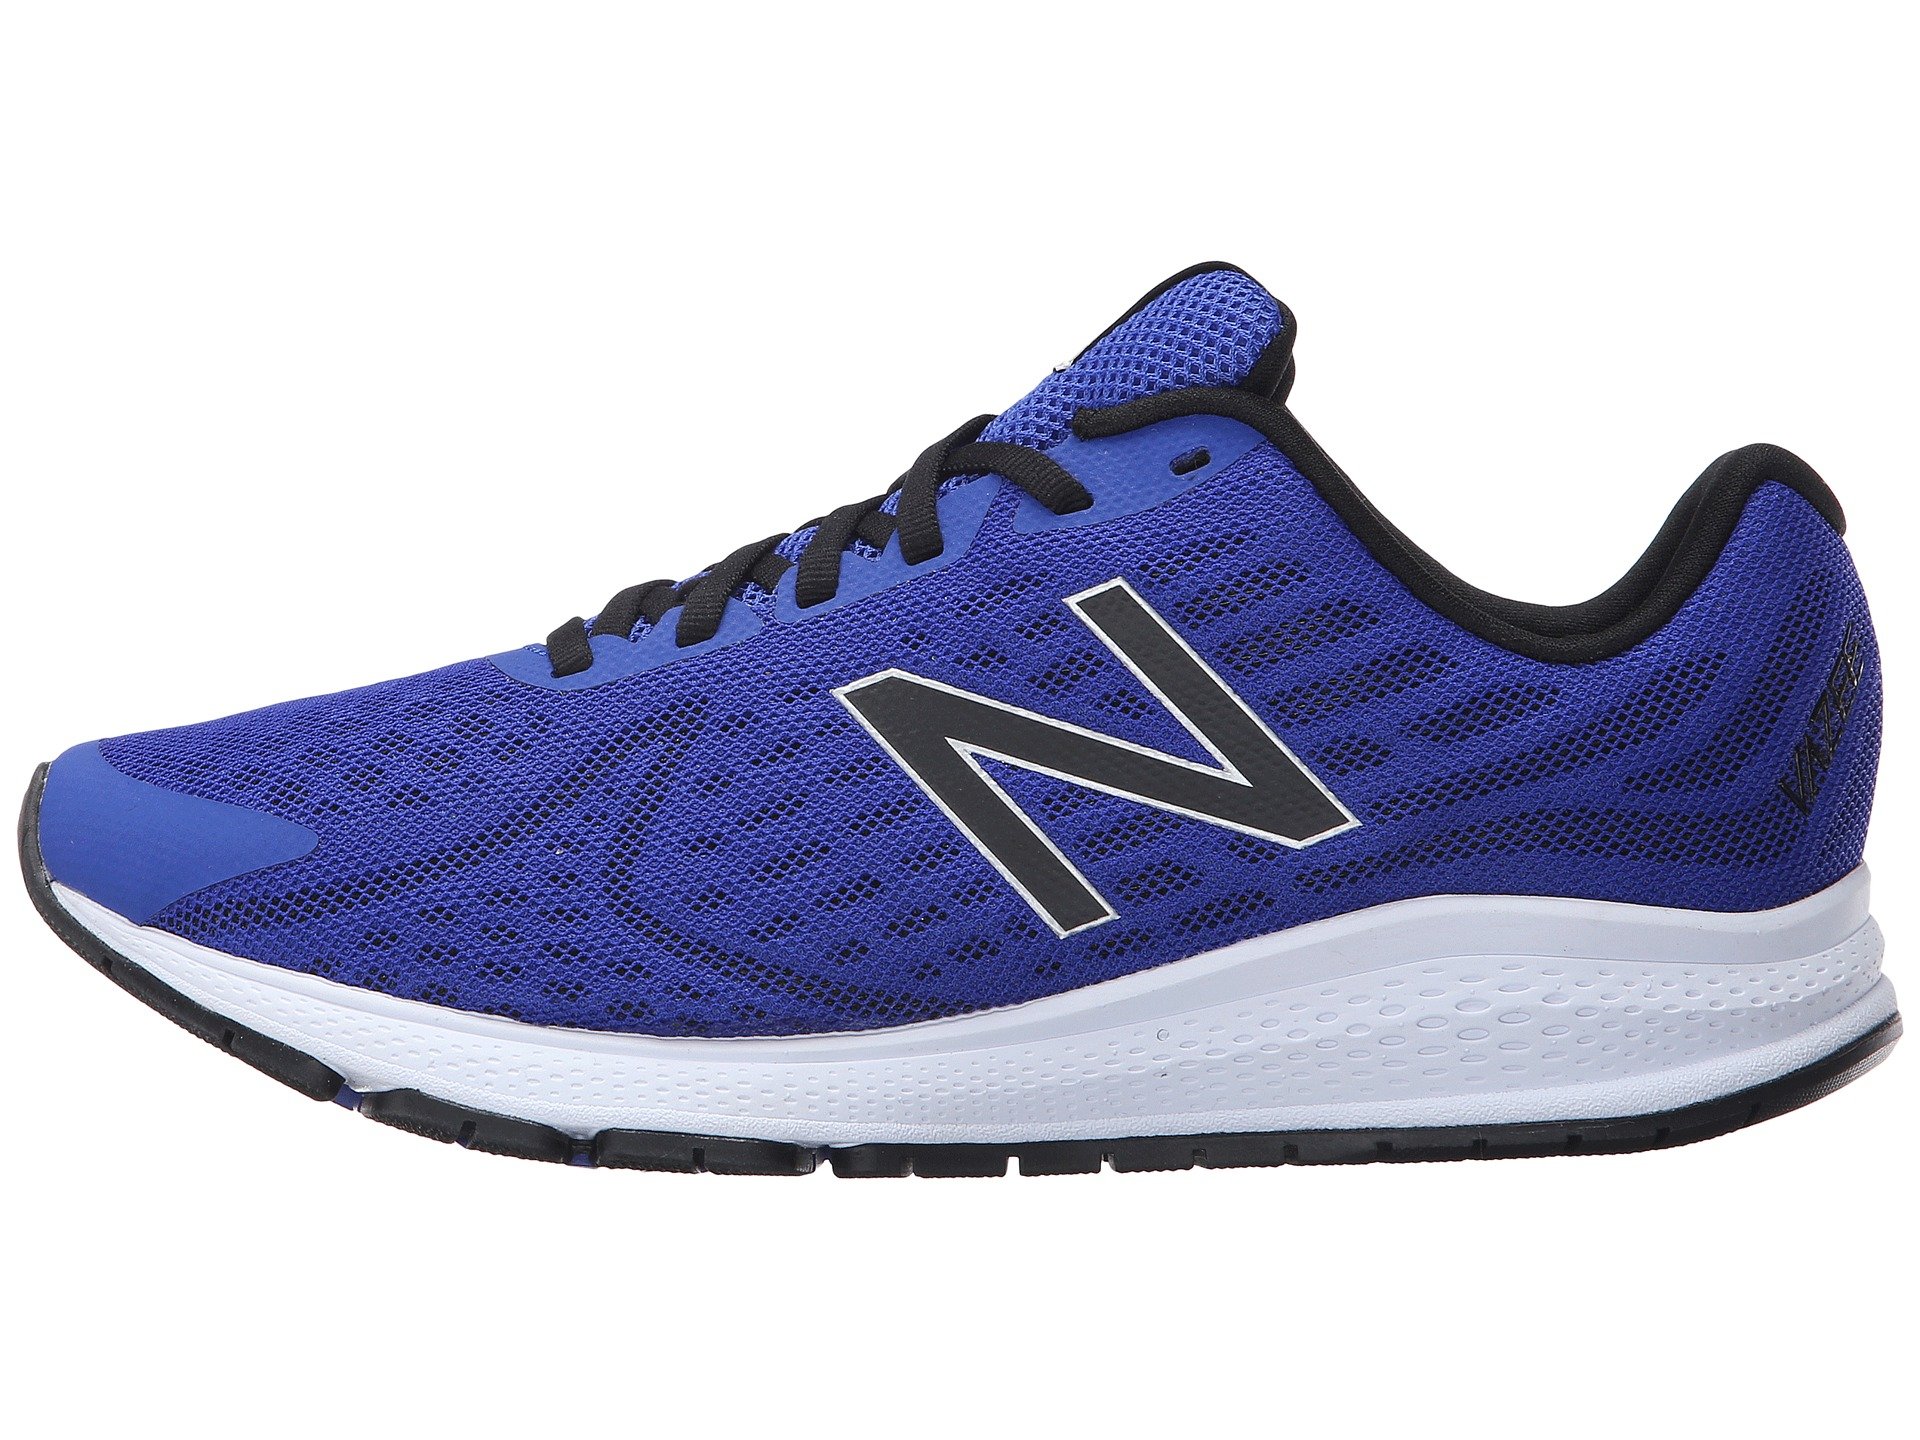 Most Comfortable New Balance Running Shoes